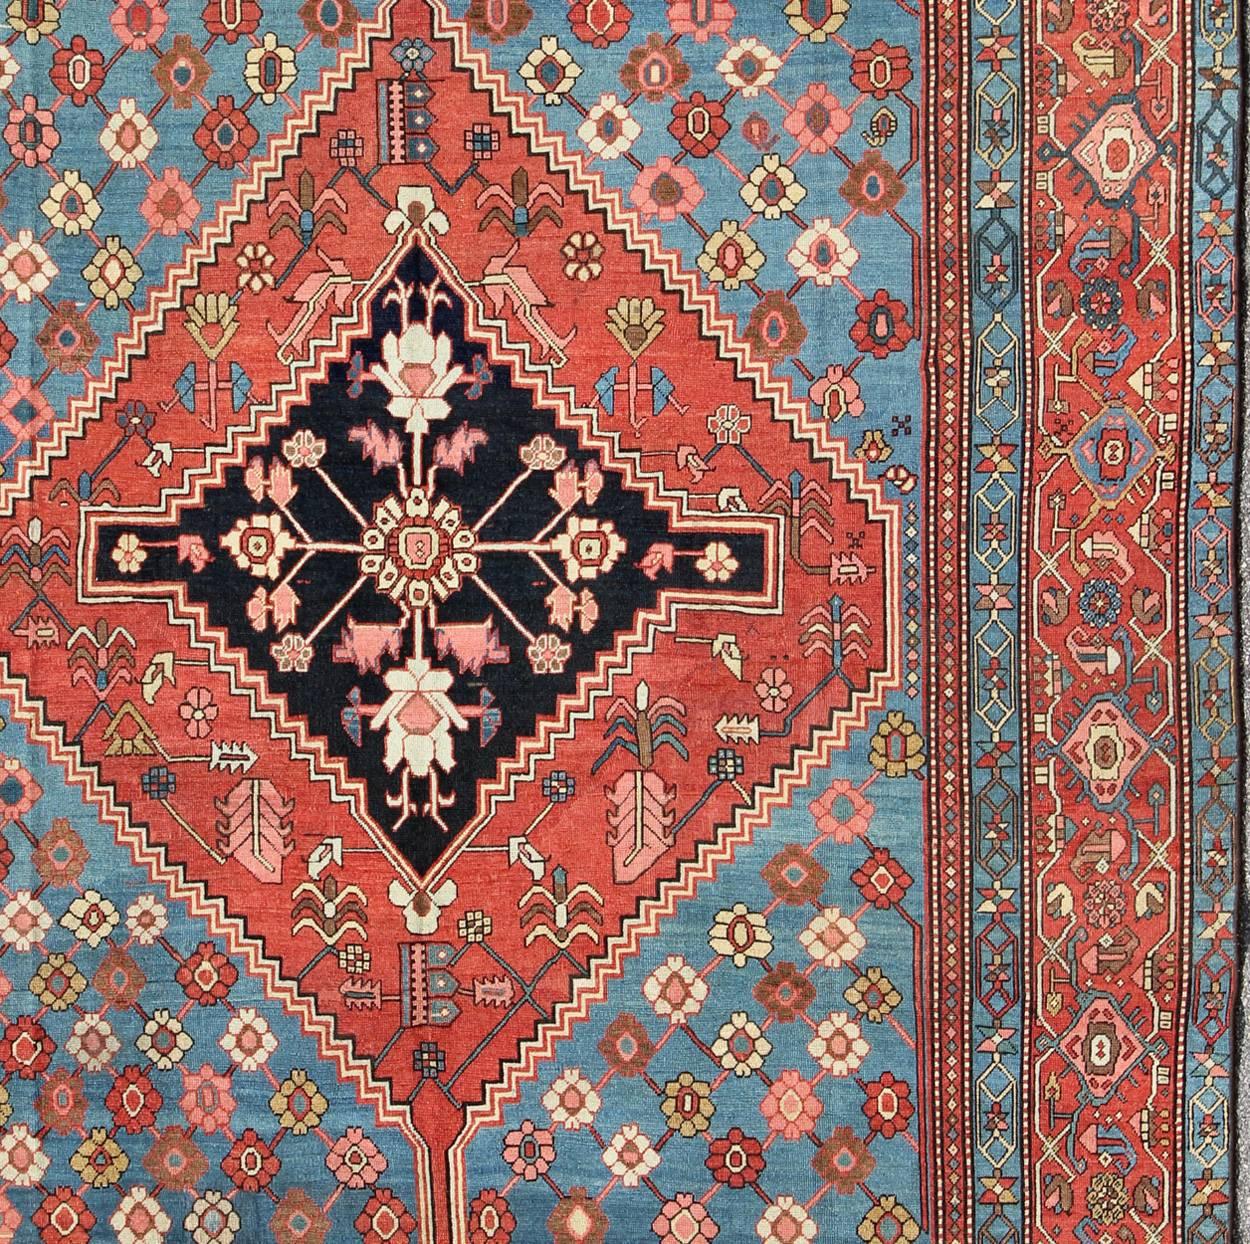 Hand-Knotted Antique Persian Bakhshaish Carpet with a Unique Geometric Medallion and Design For Sale